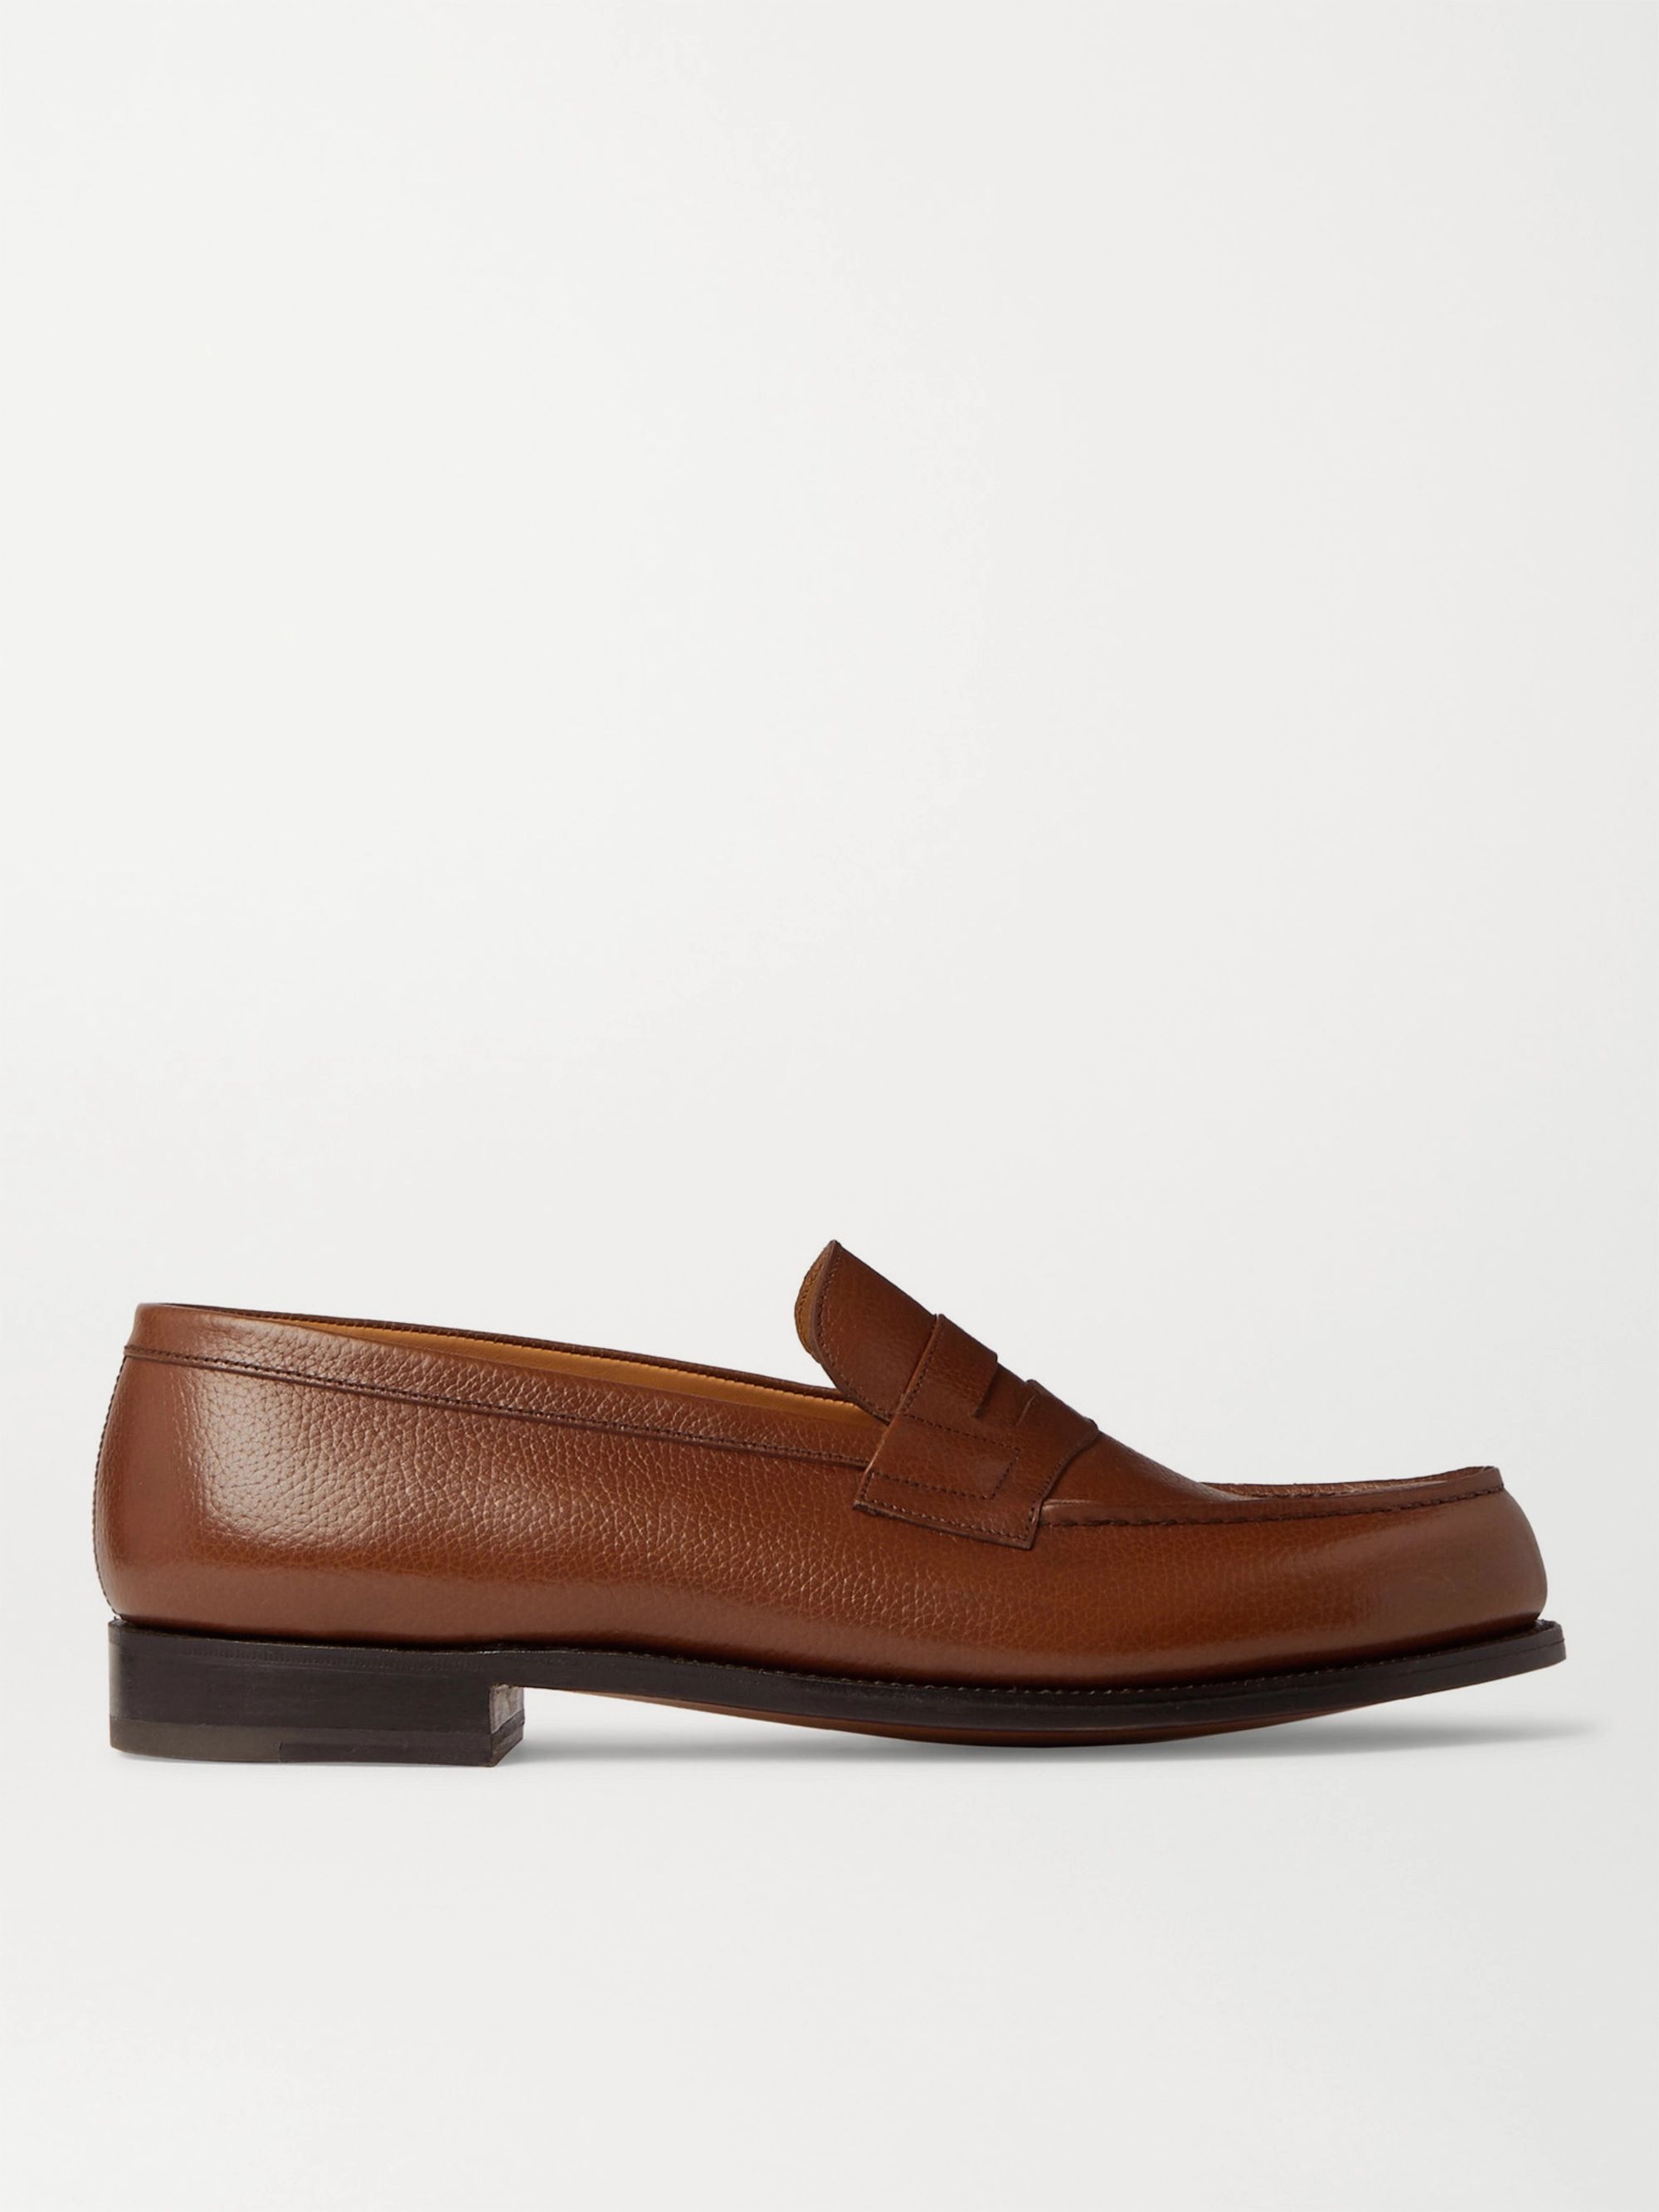 Brown 180 Moccasin Full-Grain Leather Loafers | J.M. Weston | MR PORTER